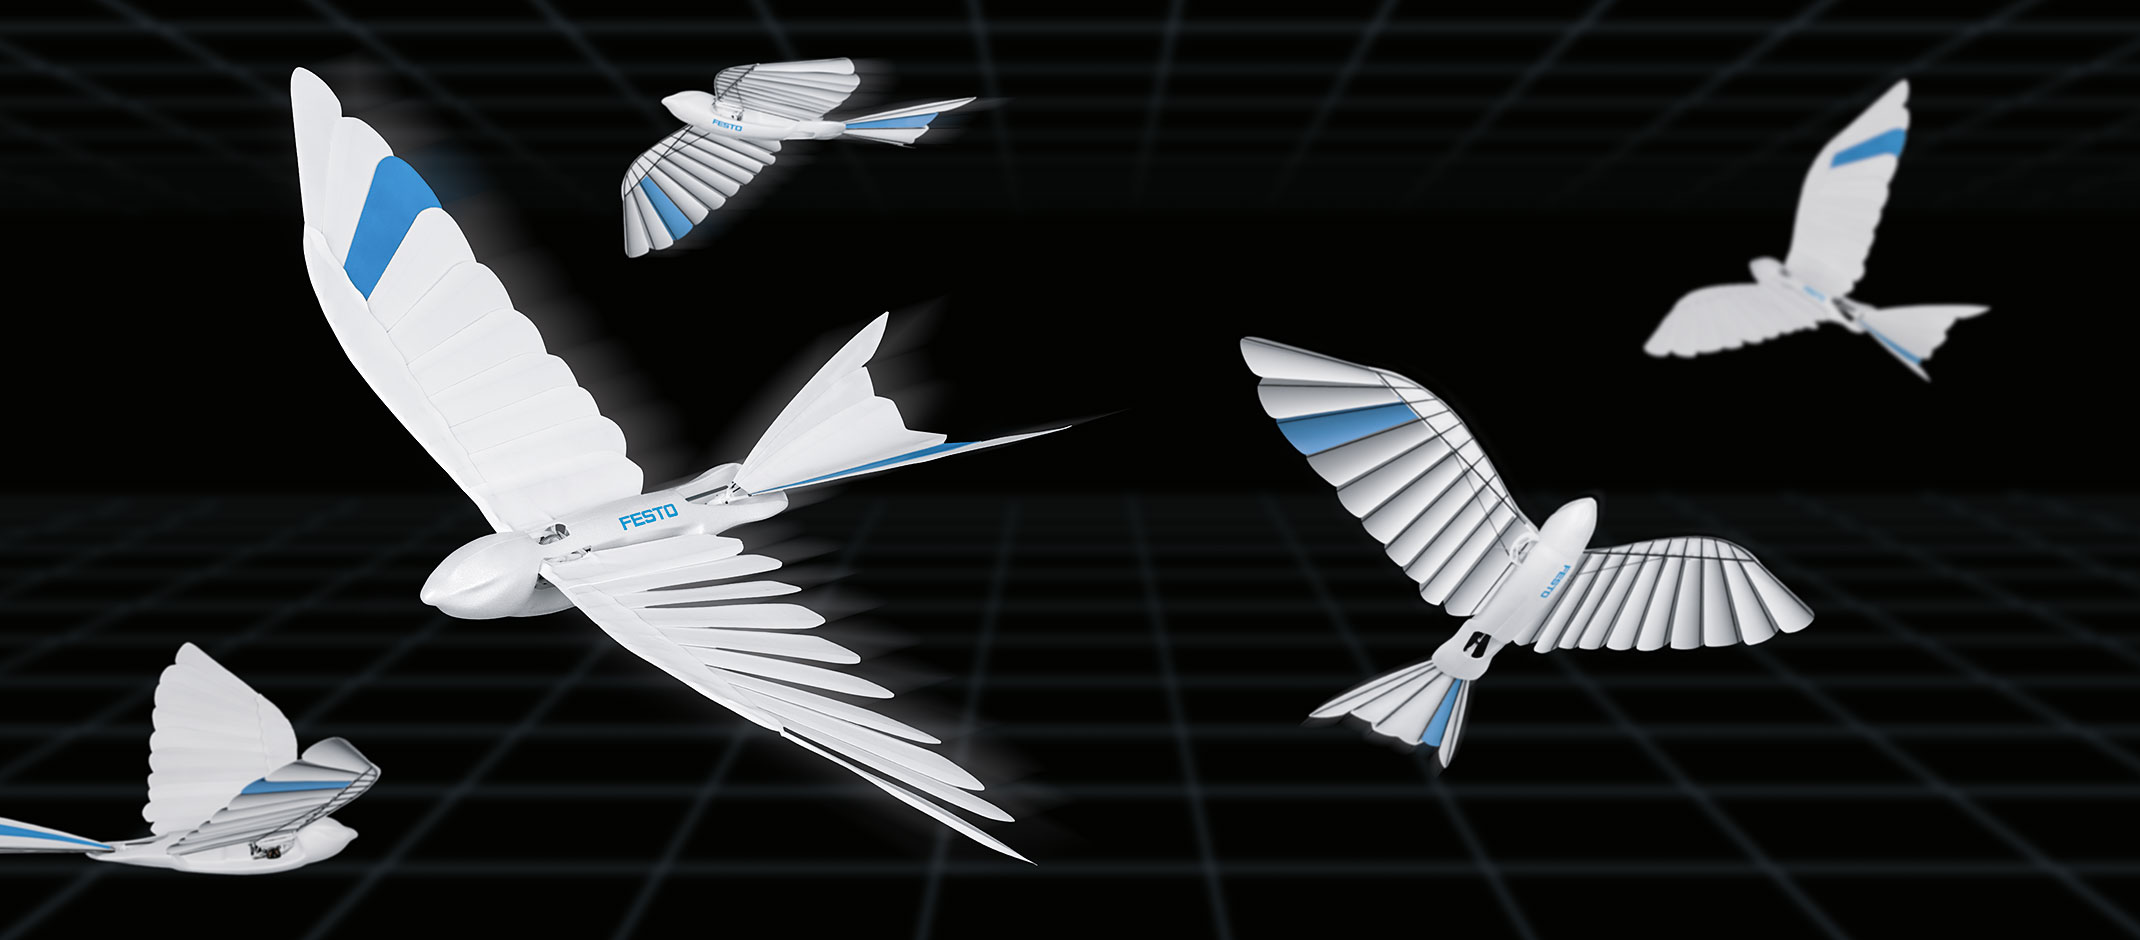 latest biomimetic robots a flying feathered bird and ball-bottomed helper arm | TechCrunch